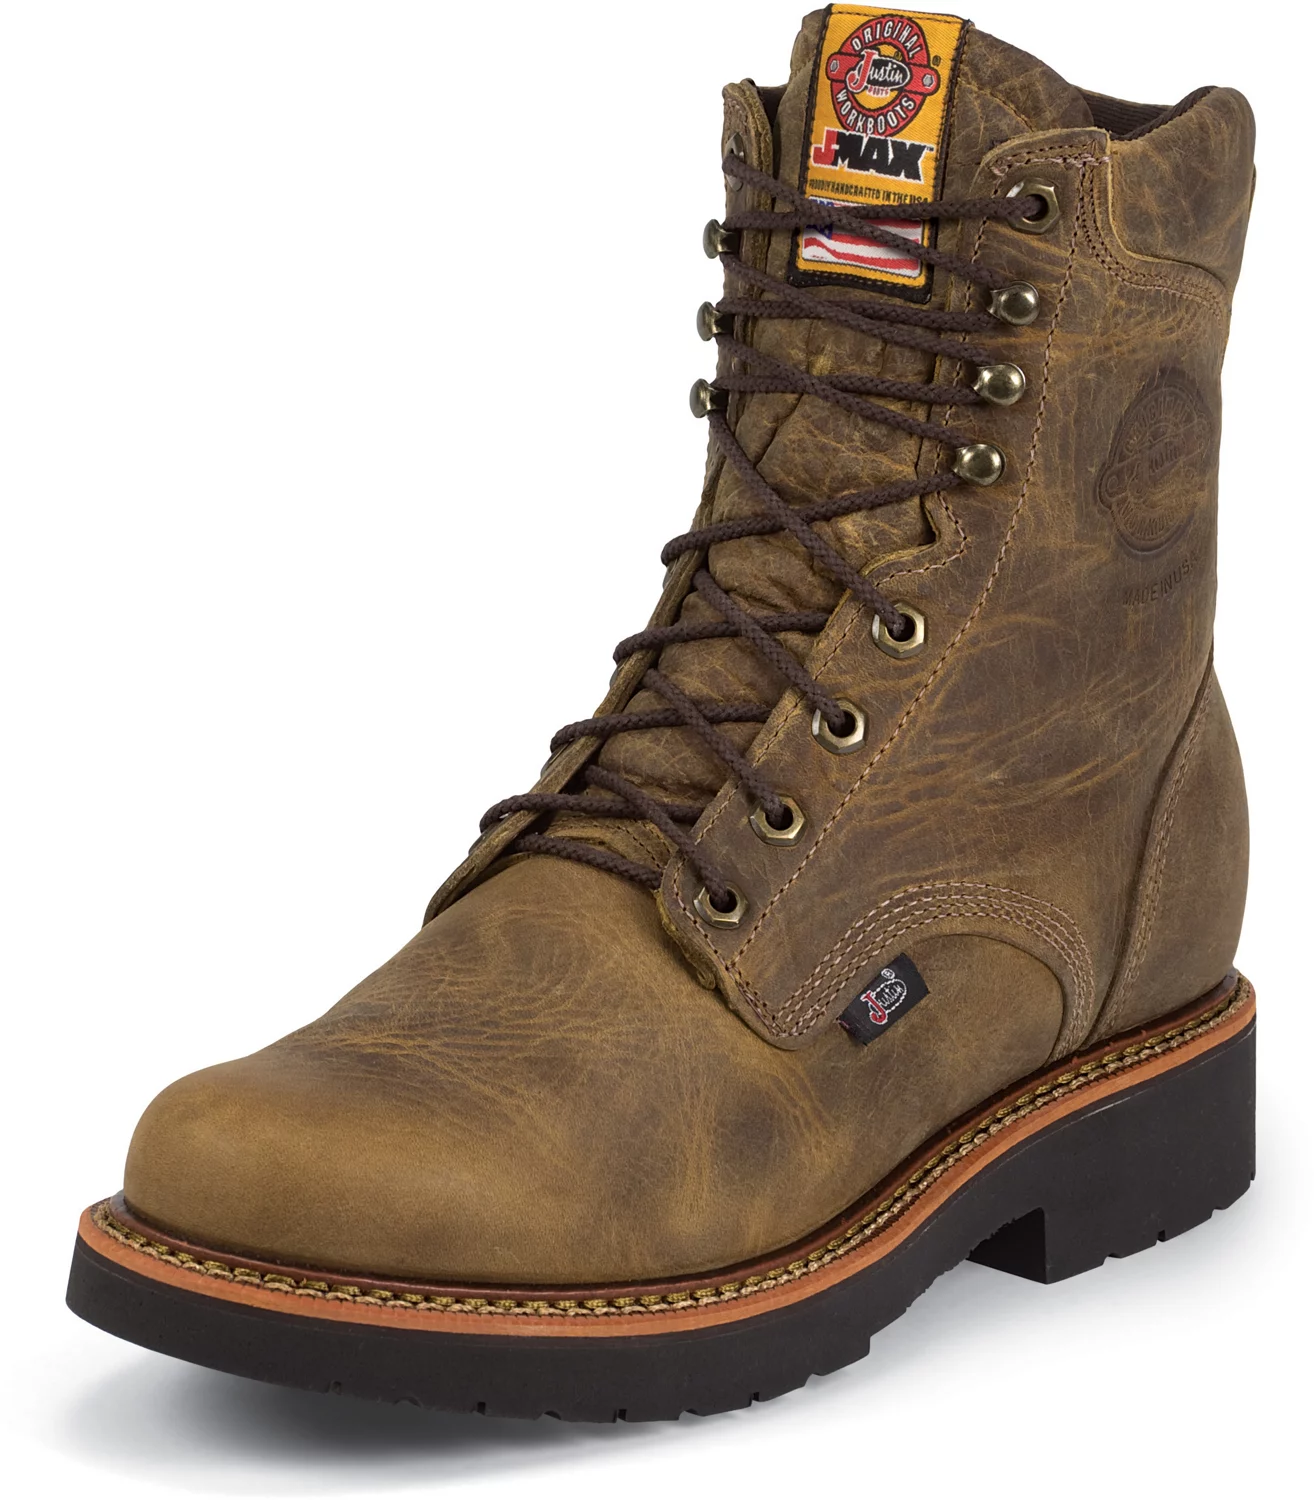 Steel Toe Boots & Safety Shoes - Safety Toe Work Boots | Academy